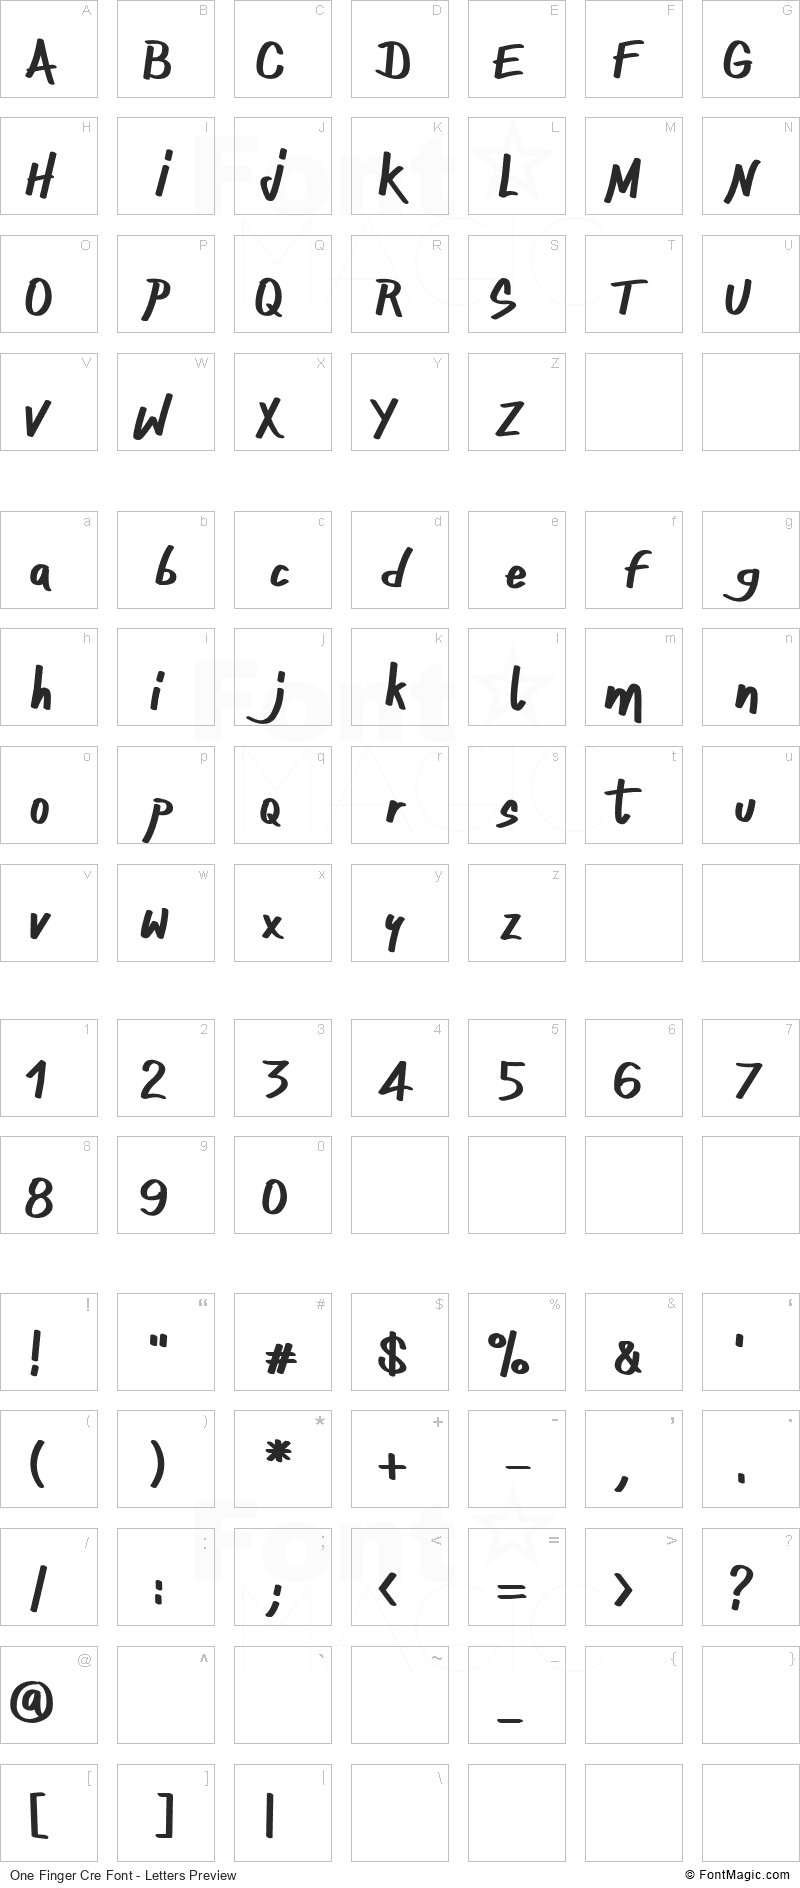 One Finger Cre Font - All Latters Preview Chart